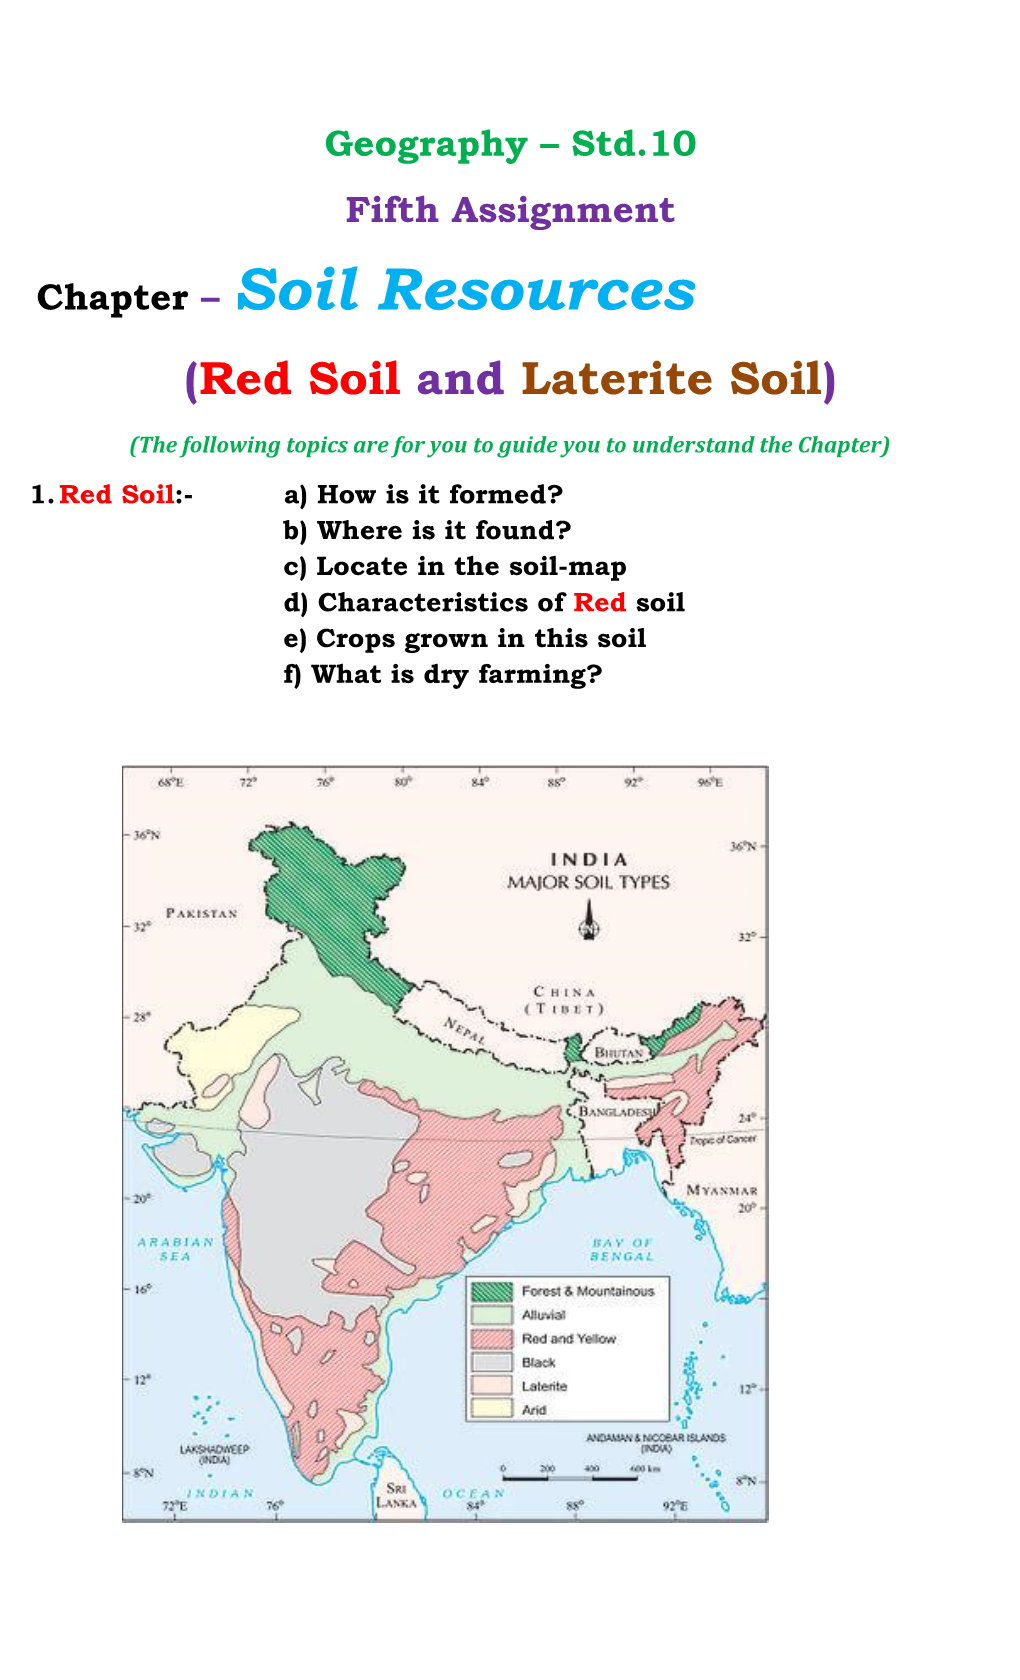 Red Soil and Laterite Soil)